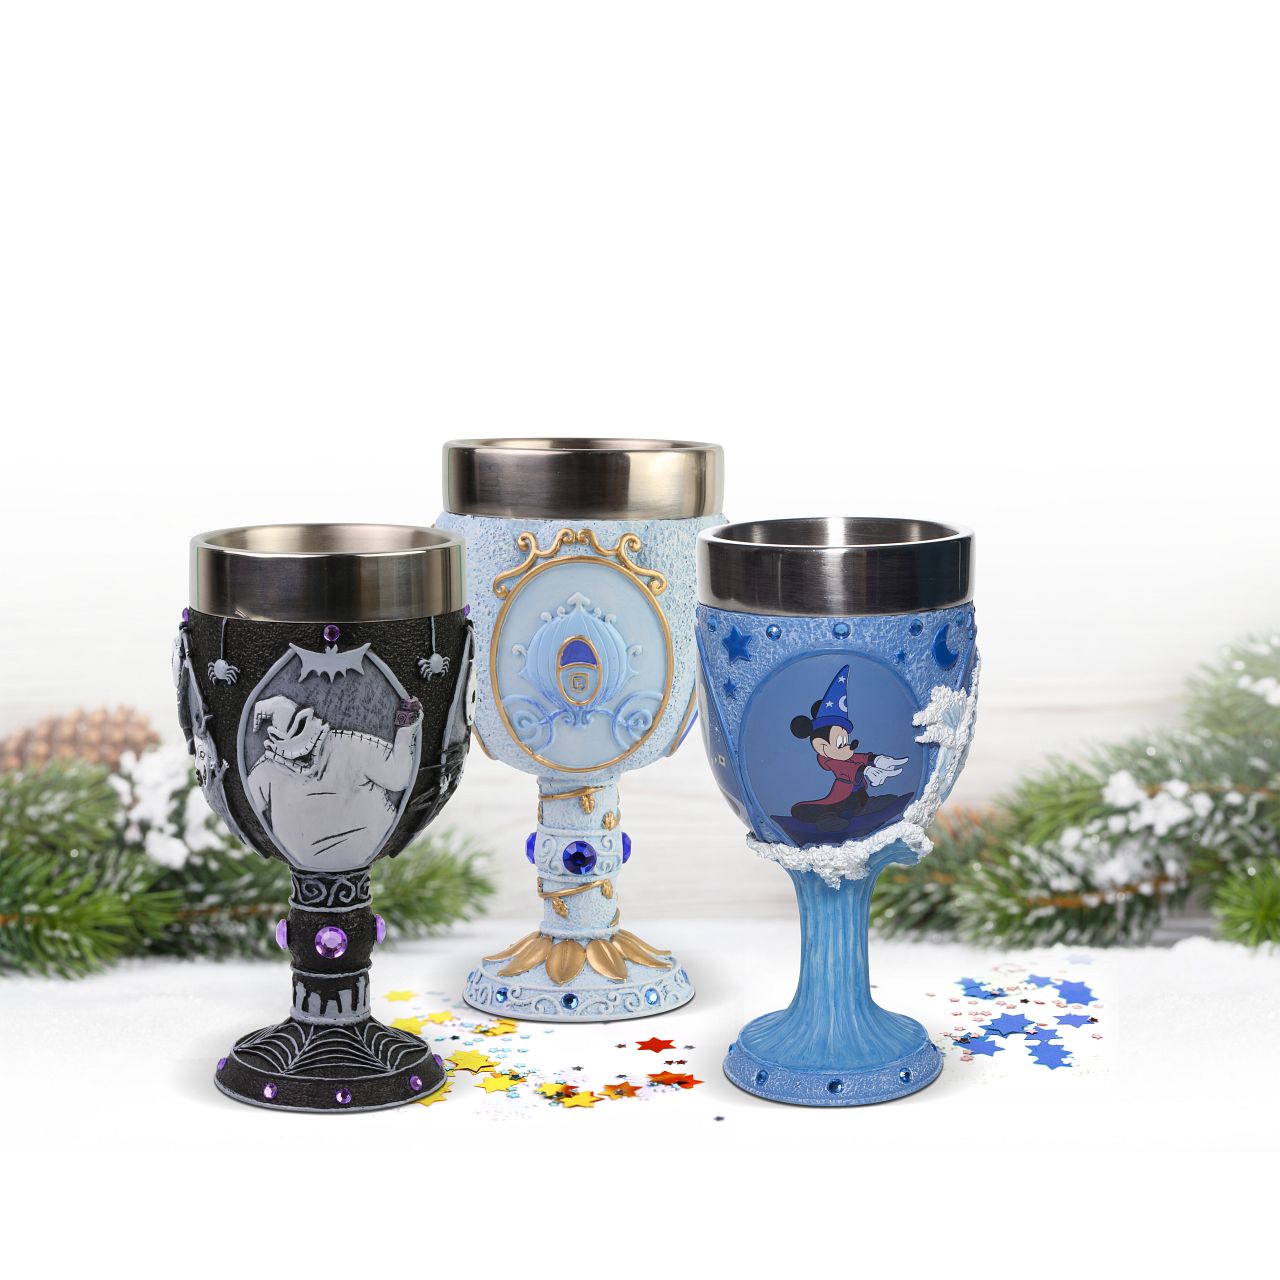 Nightmare Before Christmas Decorative Goblet  The official chalice of Halloween Town, celebrate your holidays in style with this stainless steel lined decorative goblet adorned with frightful imagery from The Nightmare Before Christmas.